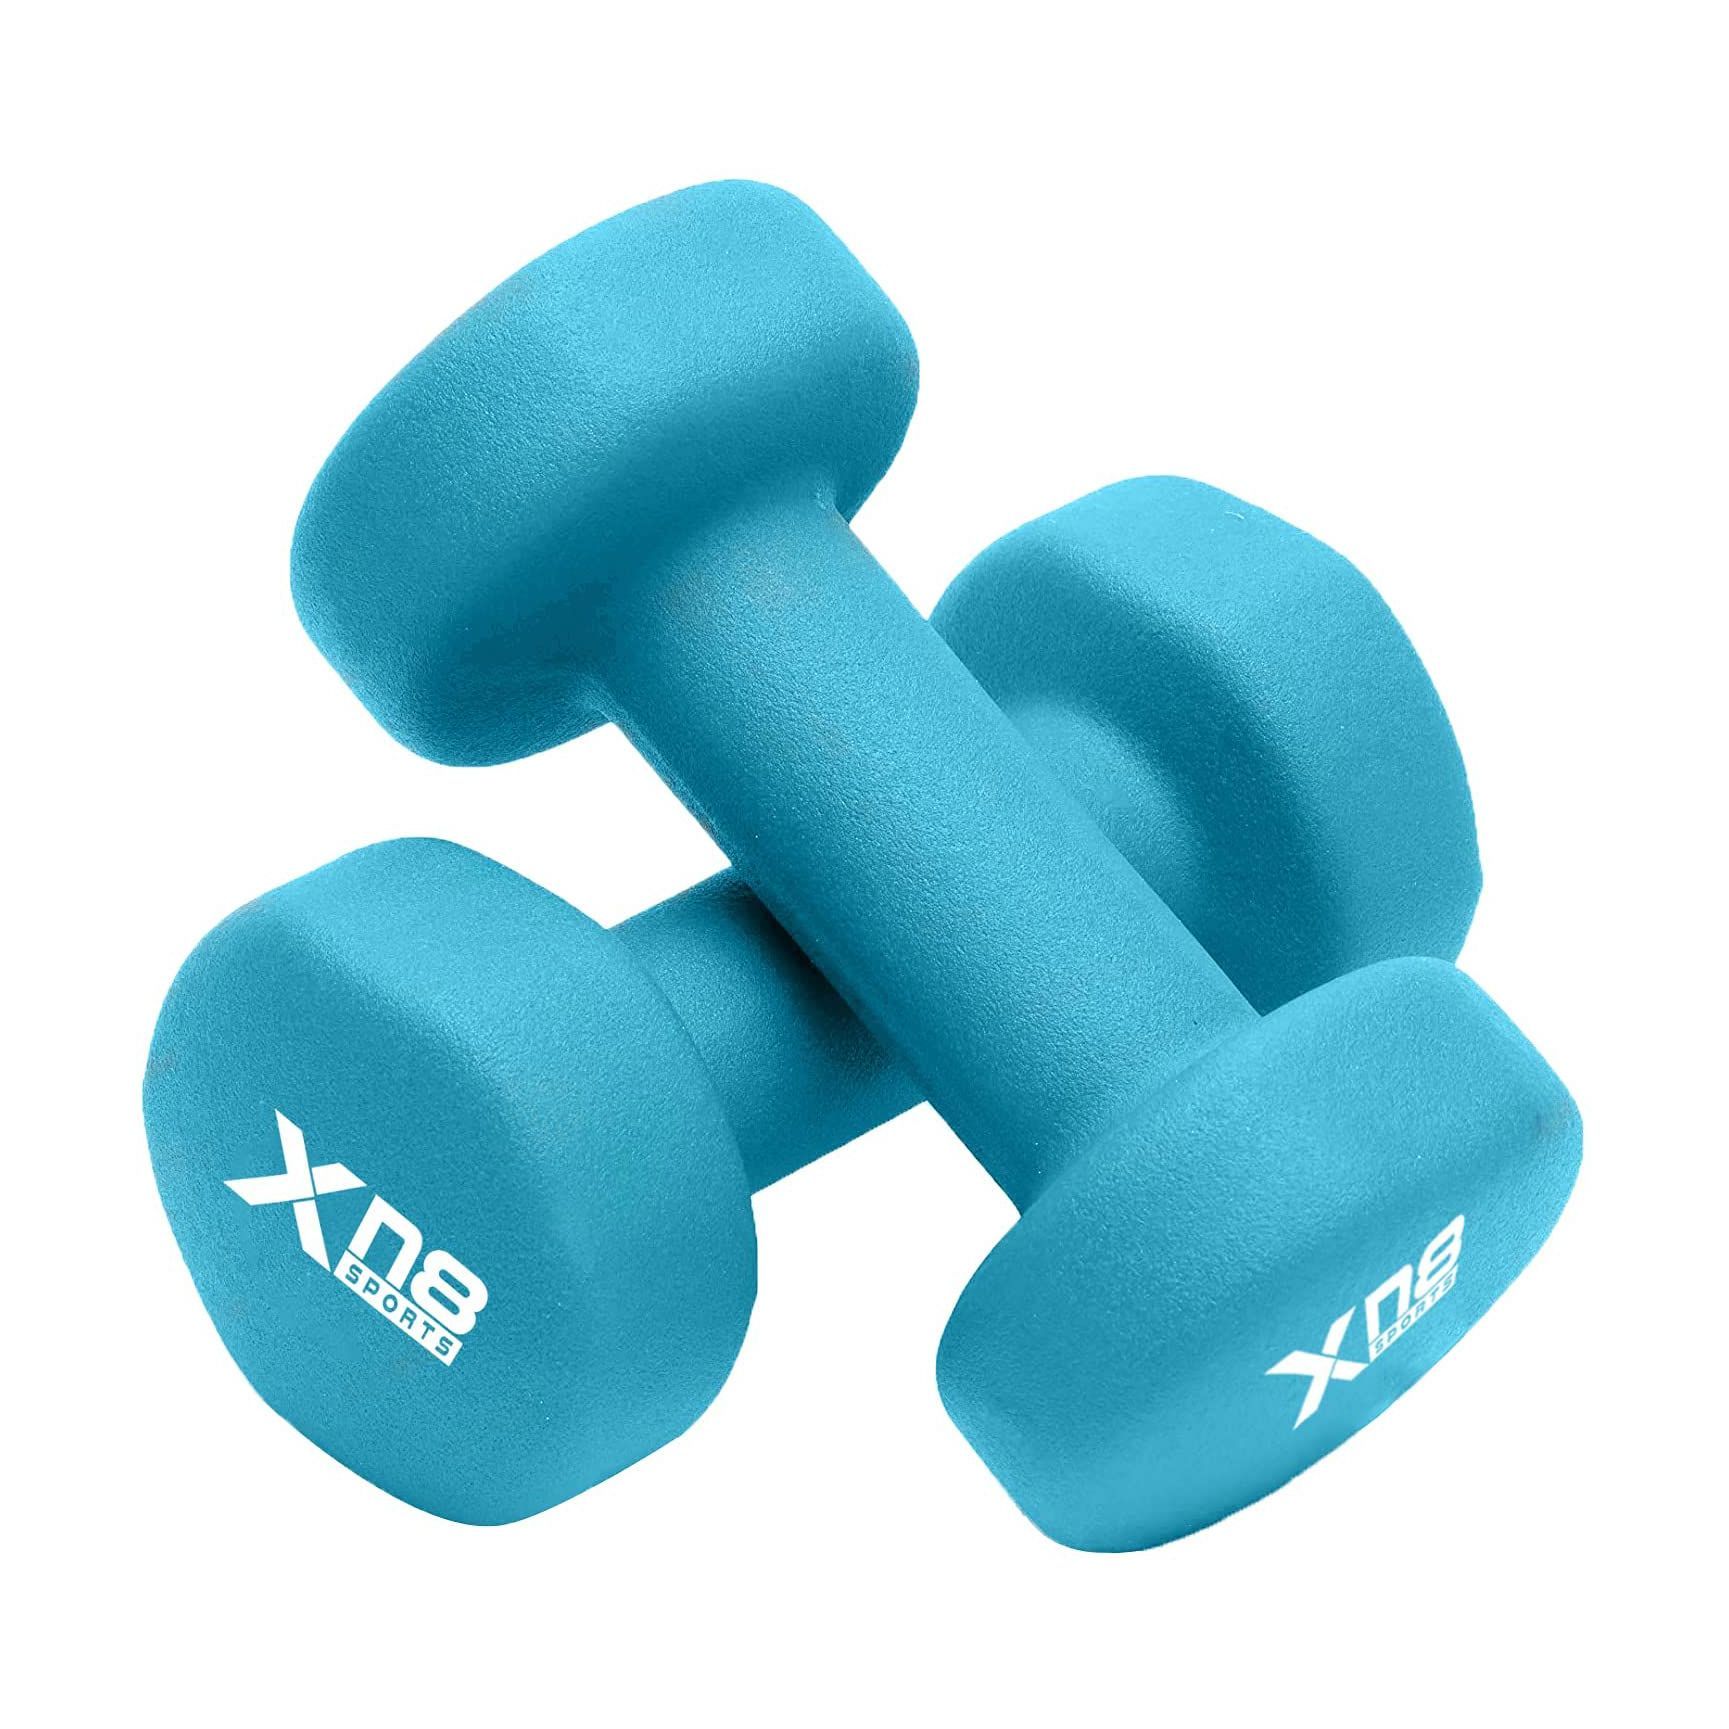 Neoprene Dumbbells Weights Home Gym Fitness Aerobic Exercise Iron Pair Hand 